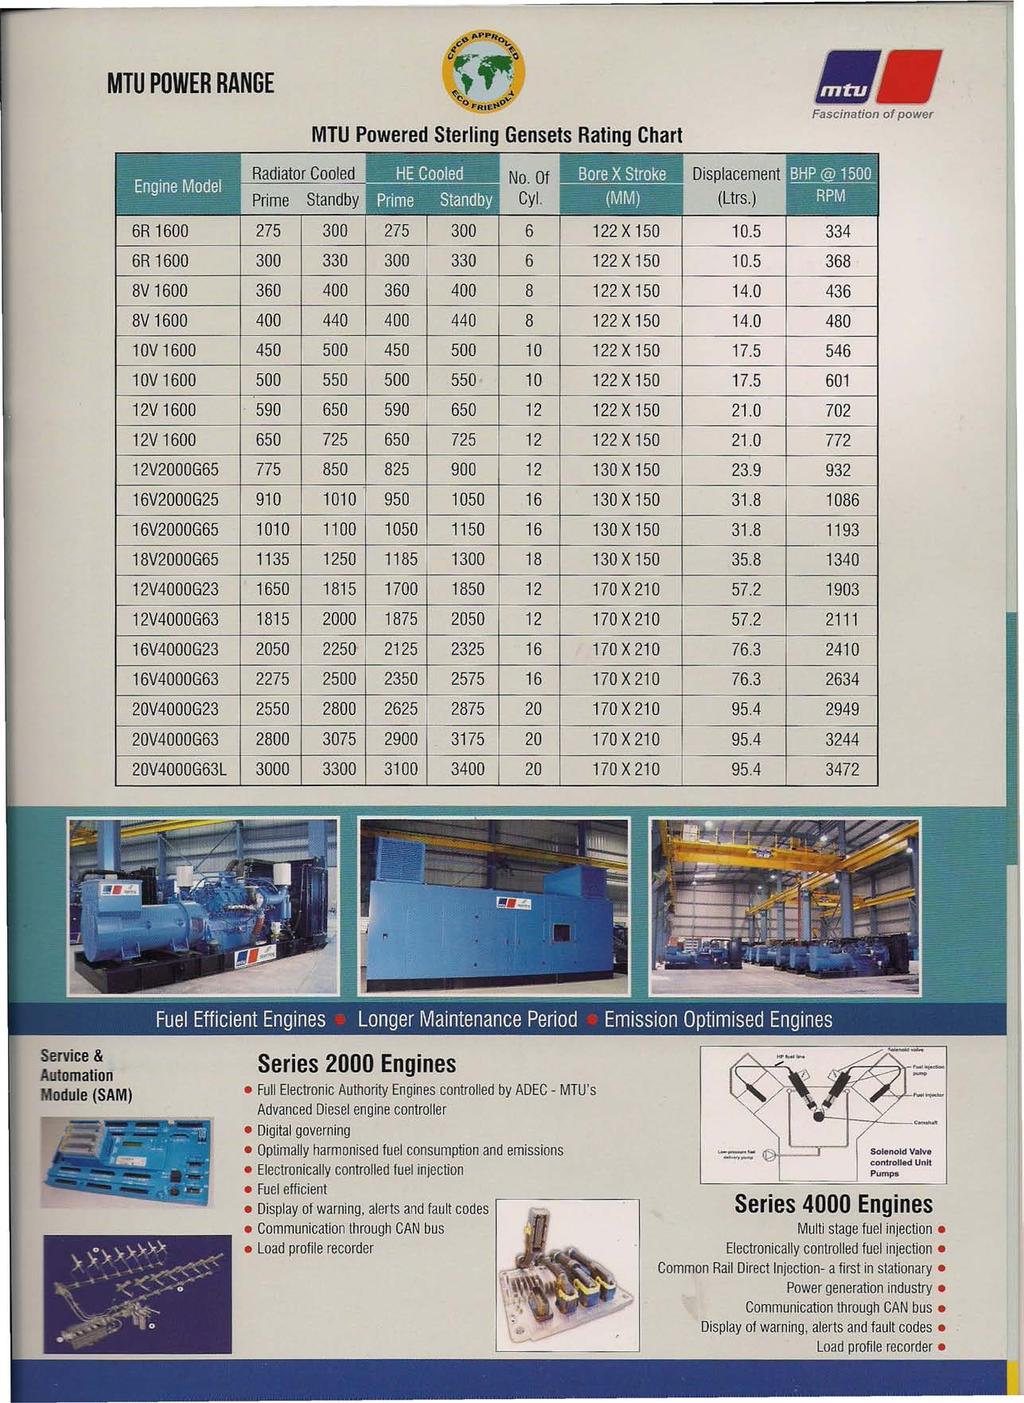 MTU POWER RANGE MTU Powered Sterling Gensets Rating Chart. ---- -----.---- ---.---- Radiator Cooled HE Cooled. No. Of :... Displacement Engine Model Prime Standby Cyl. (MM) (Ltrs.) ~,- -._--. - - -_.